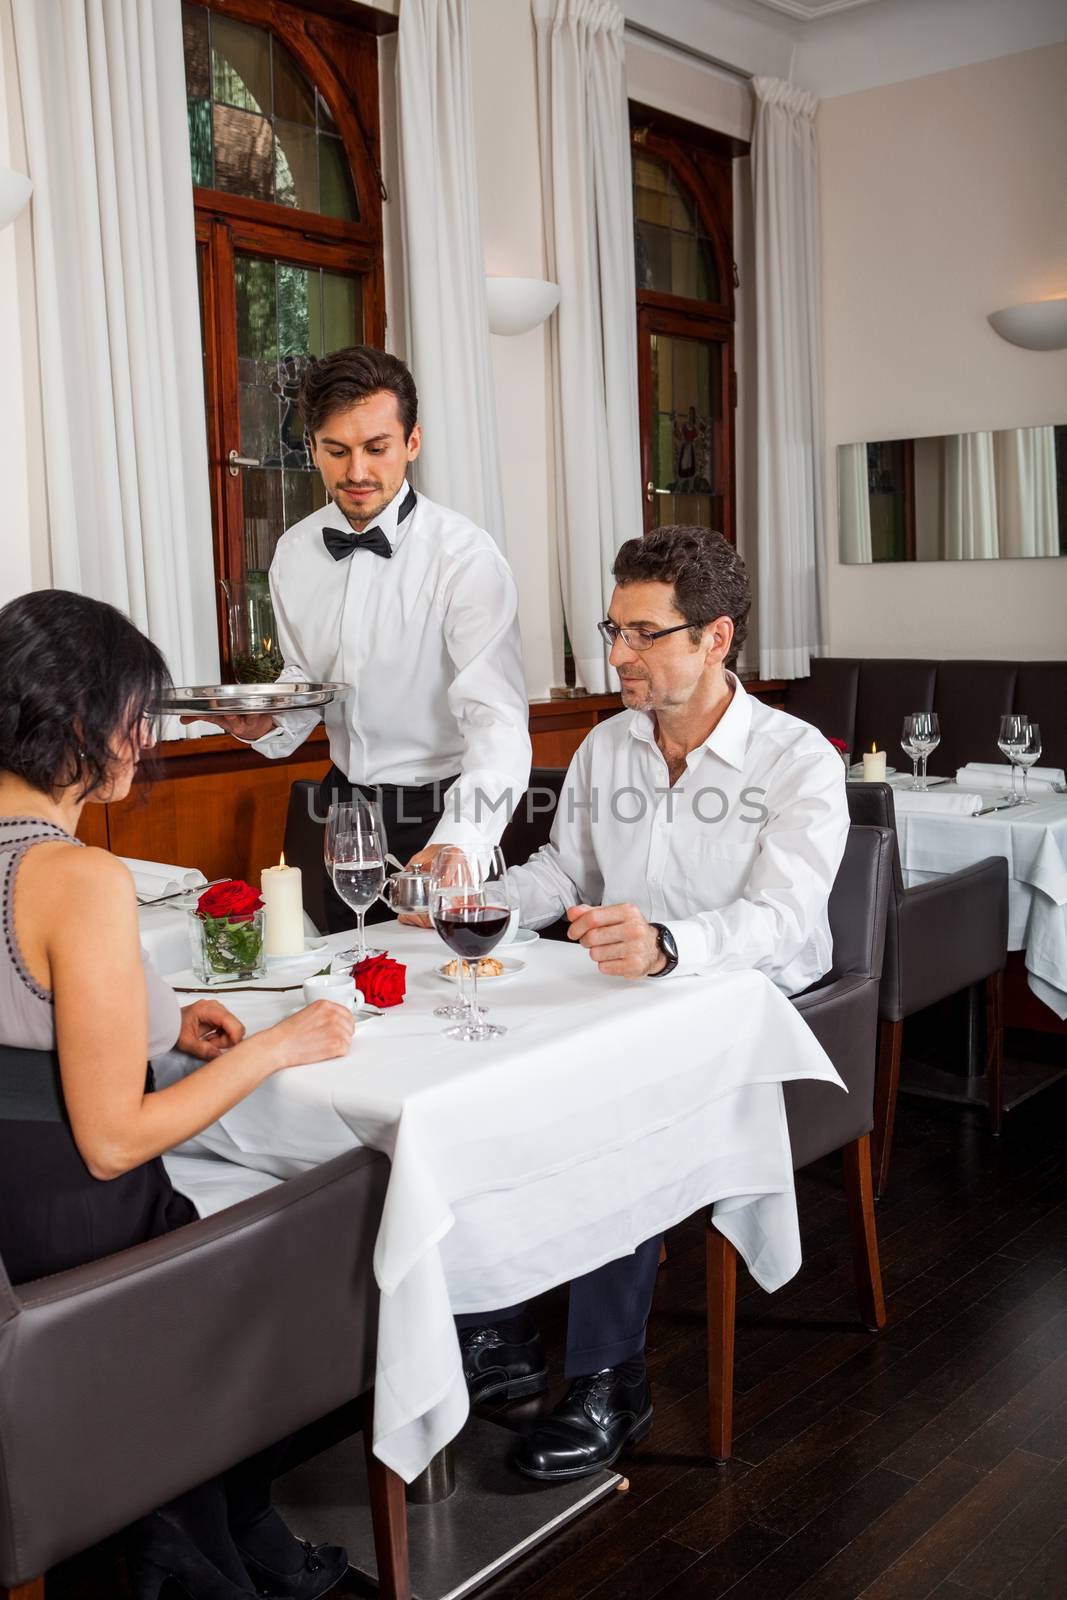 Waiter happily accommodating couple by juniart